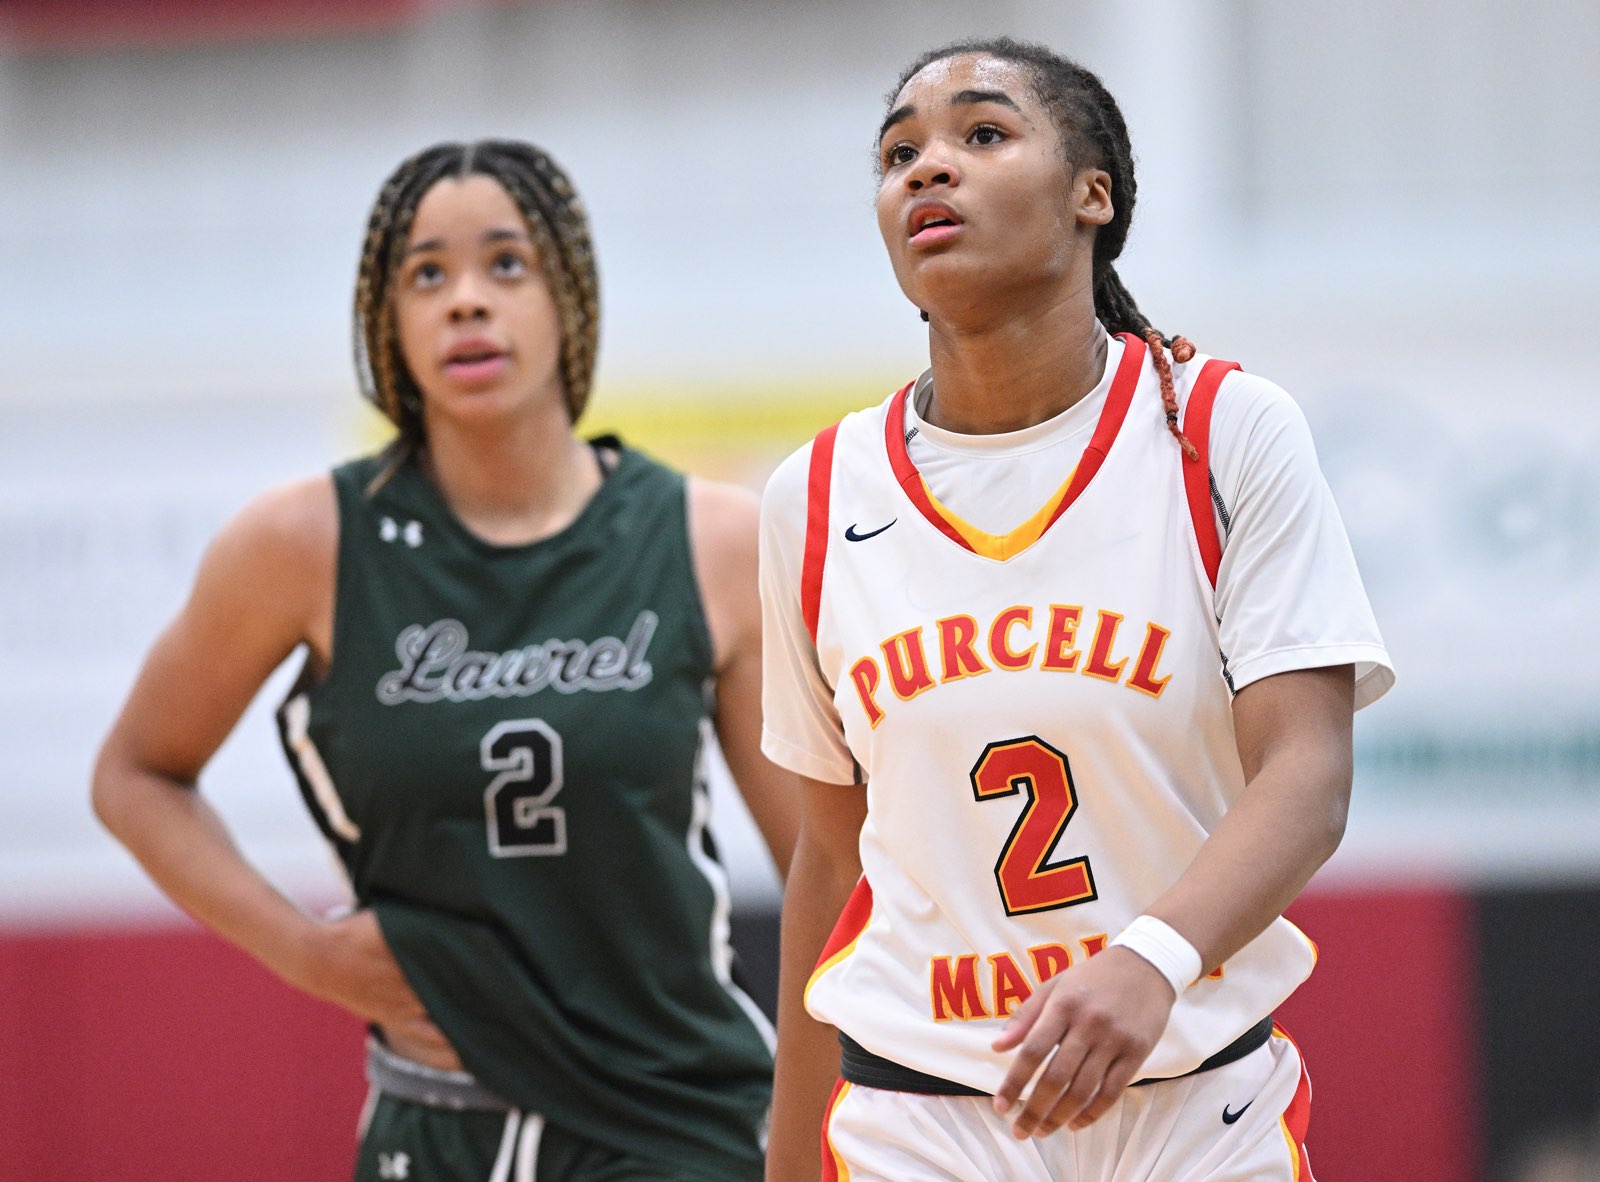 Purcell Marian's Dee Alexander and Laurel's Saniyah Hall look on during a game on January 11, 2023.